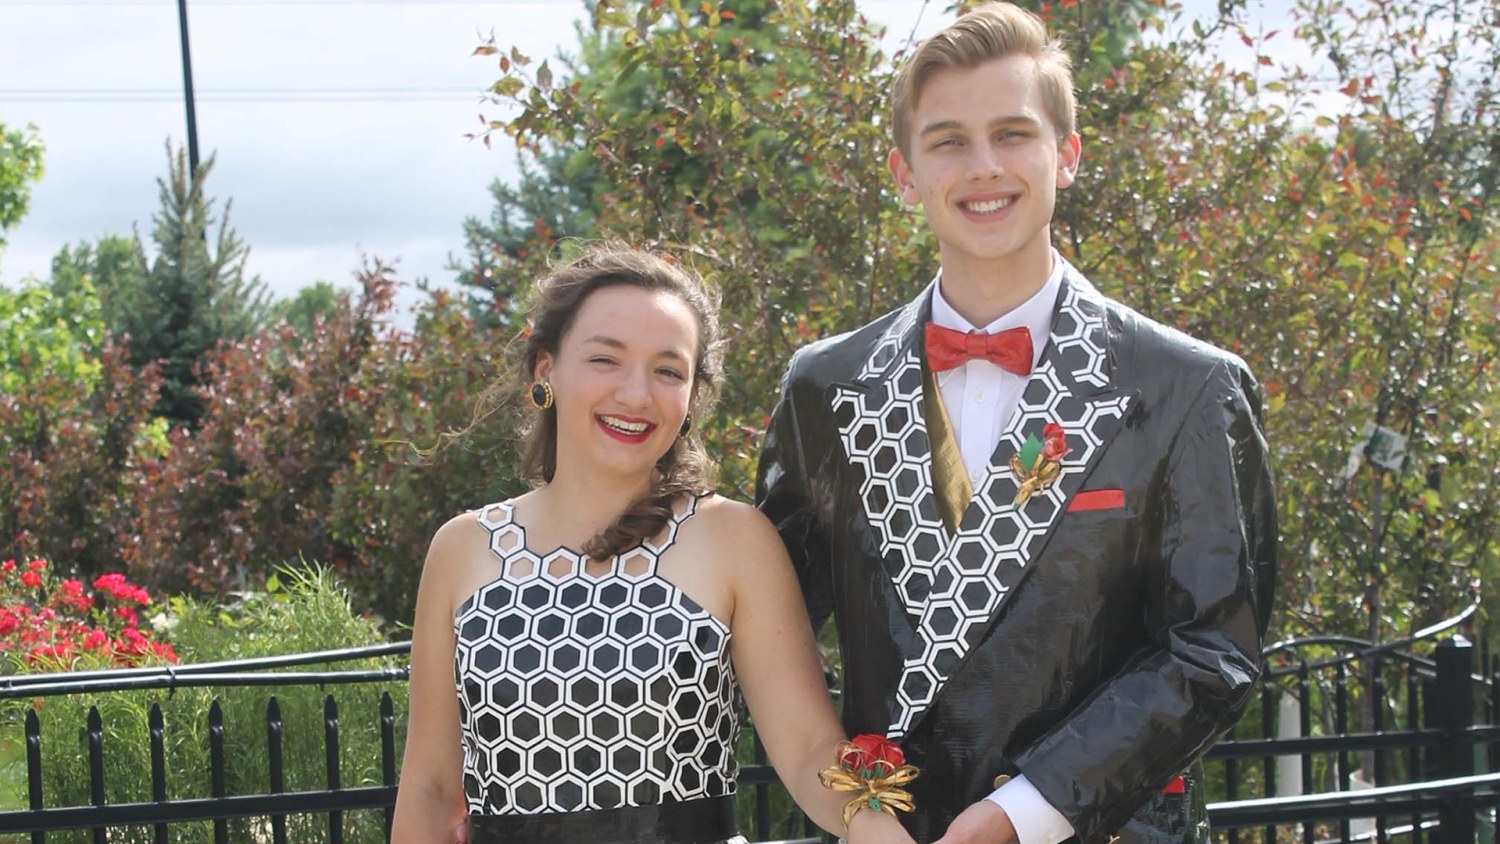 See the stunning prom dress and tuxedo made entirely of Duck Tape